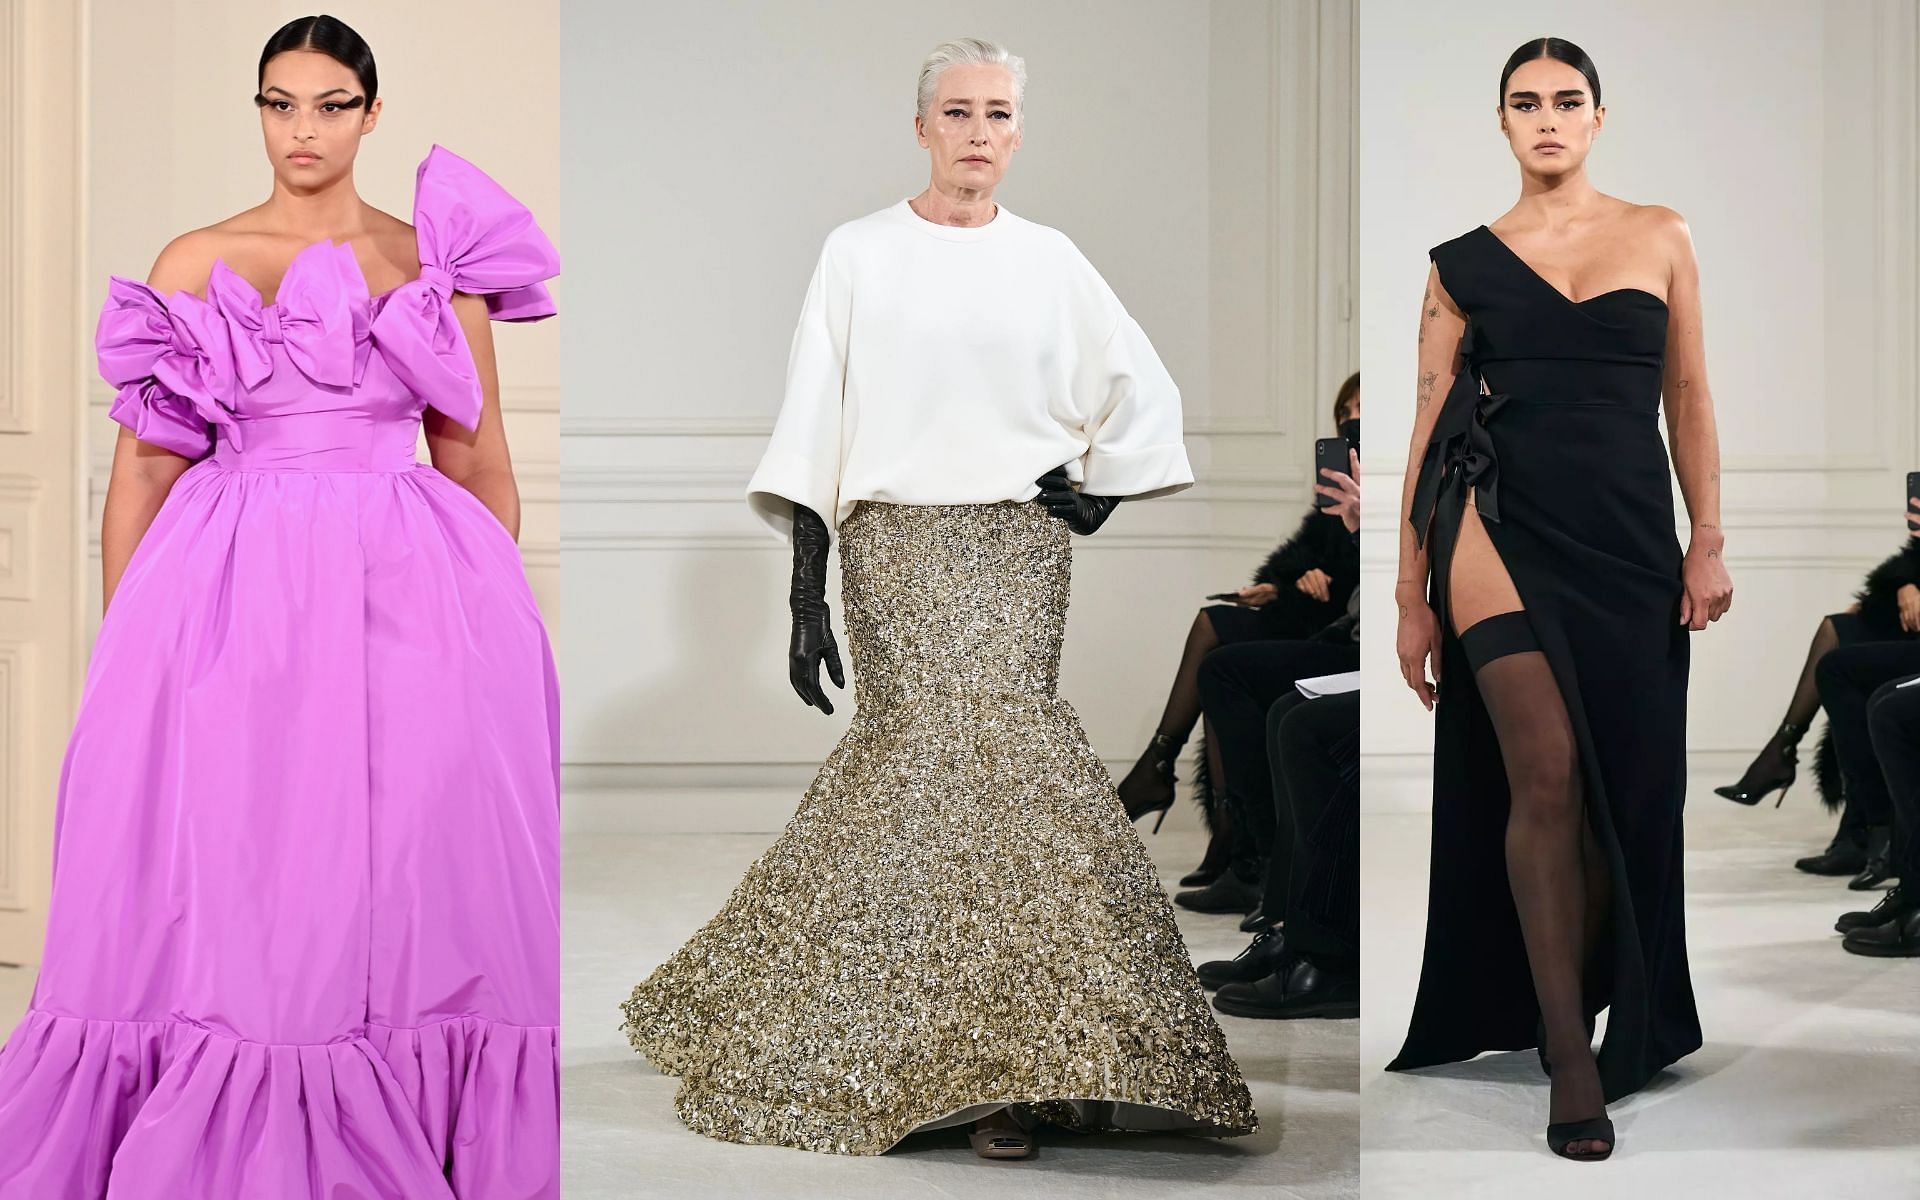 Valentino aims at size inclusivity- but only for women? (Image via Sportskeeda)